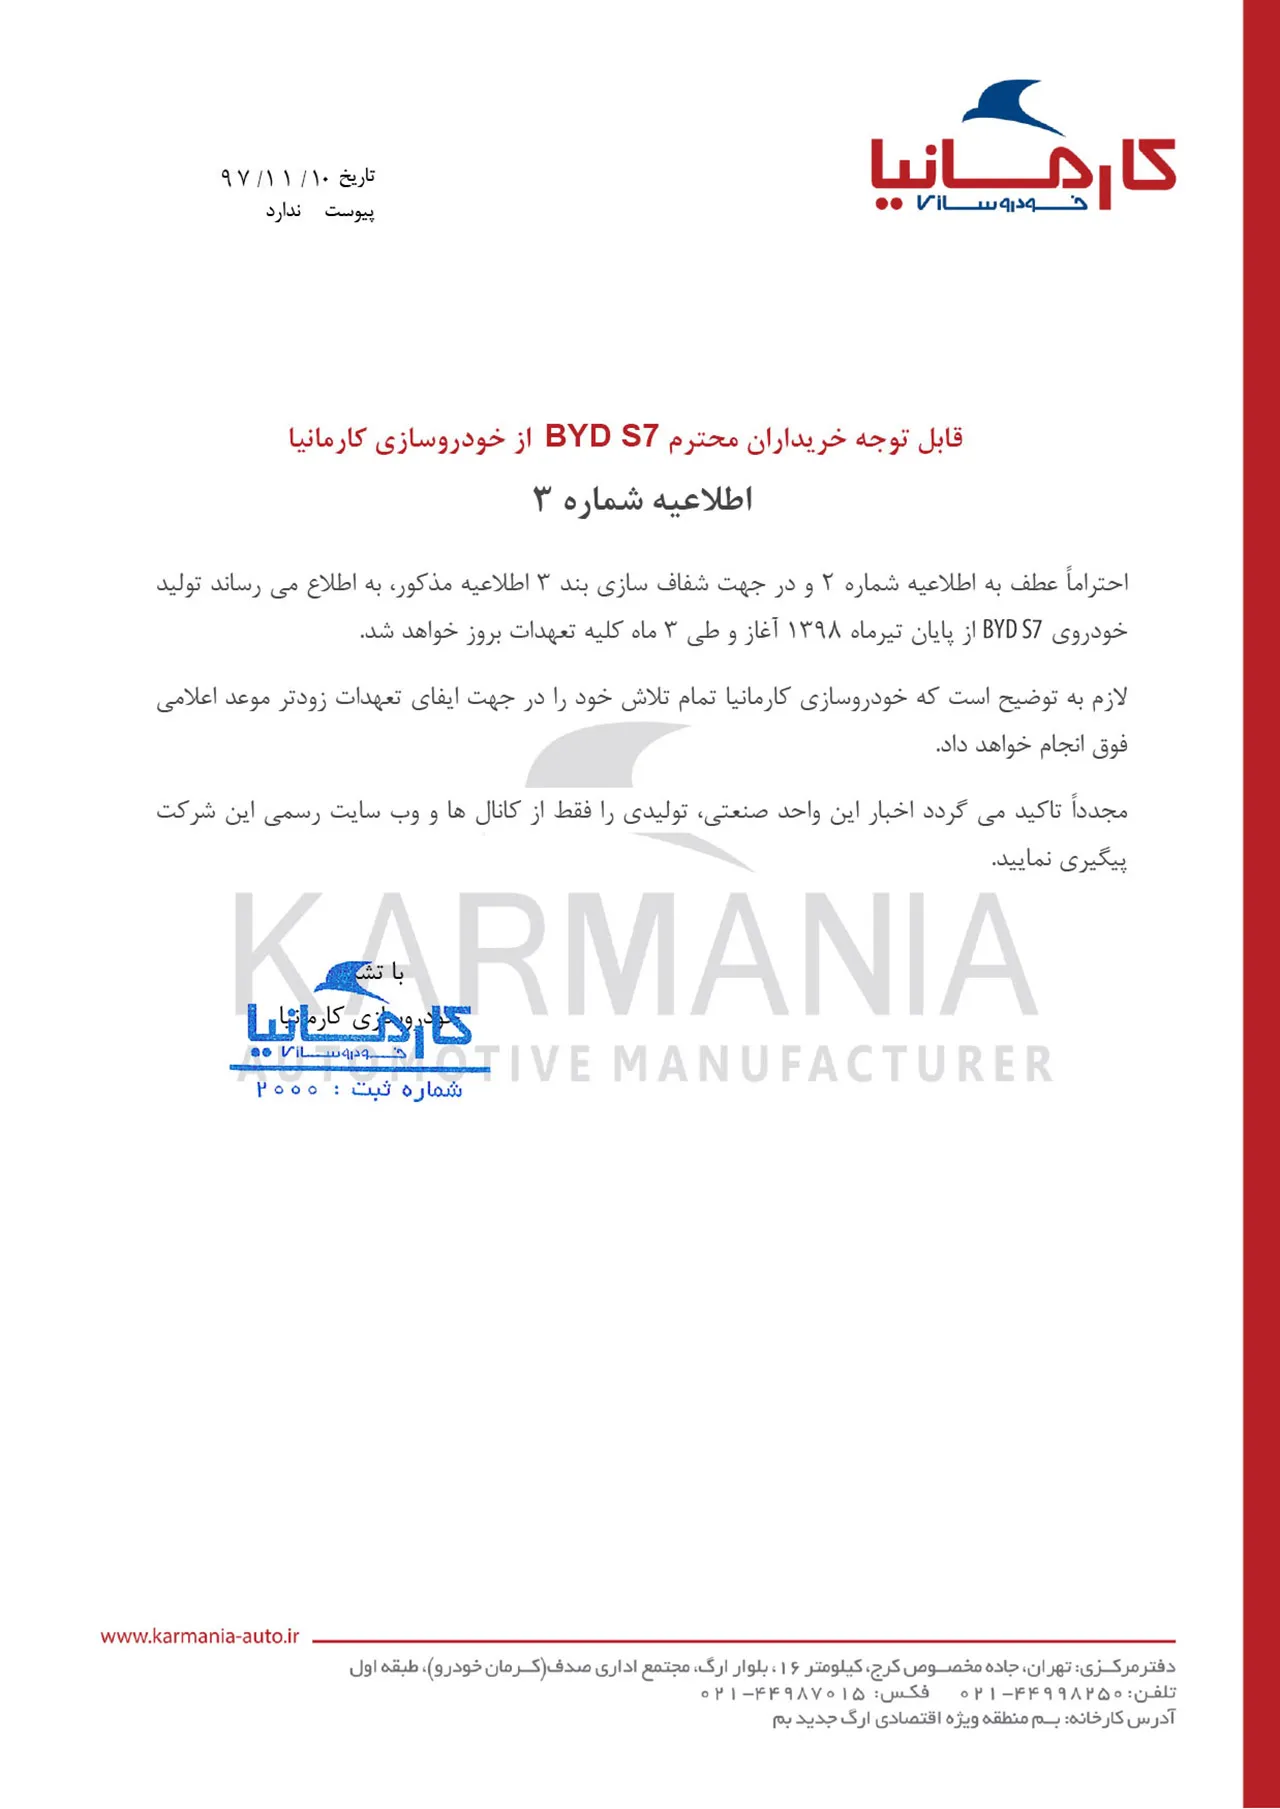 AutomobileFa Karmania Notification about BYD S7 Production